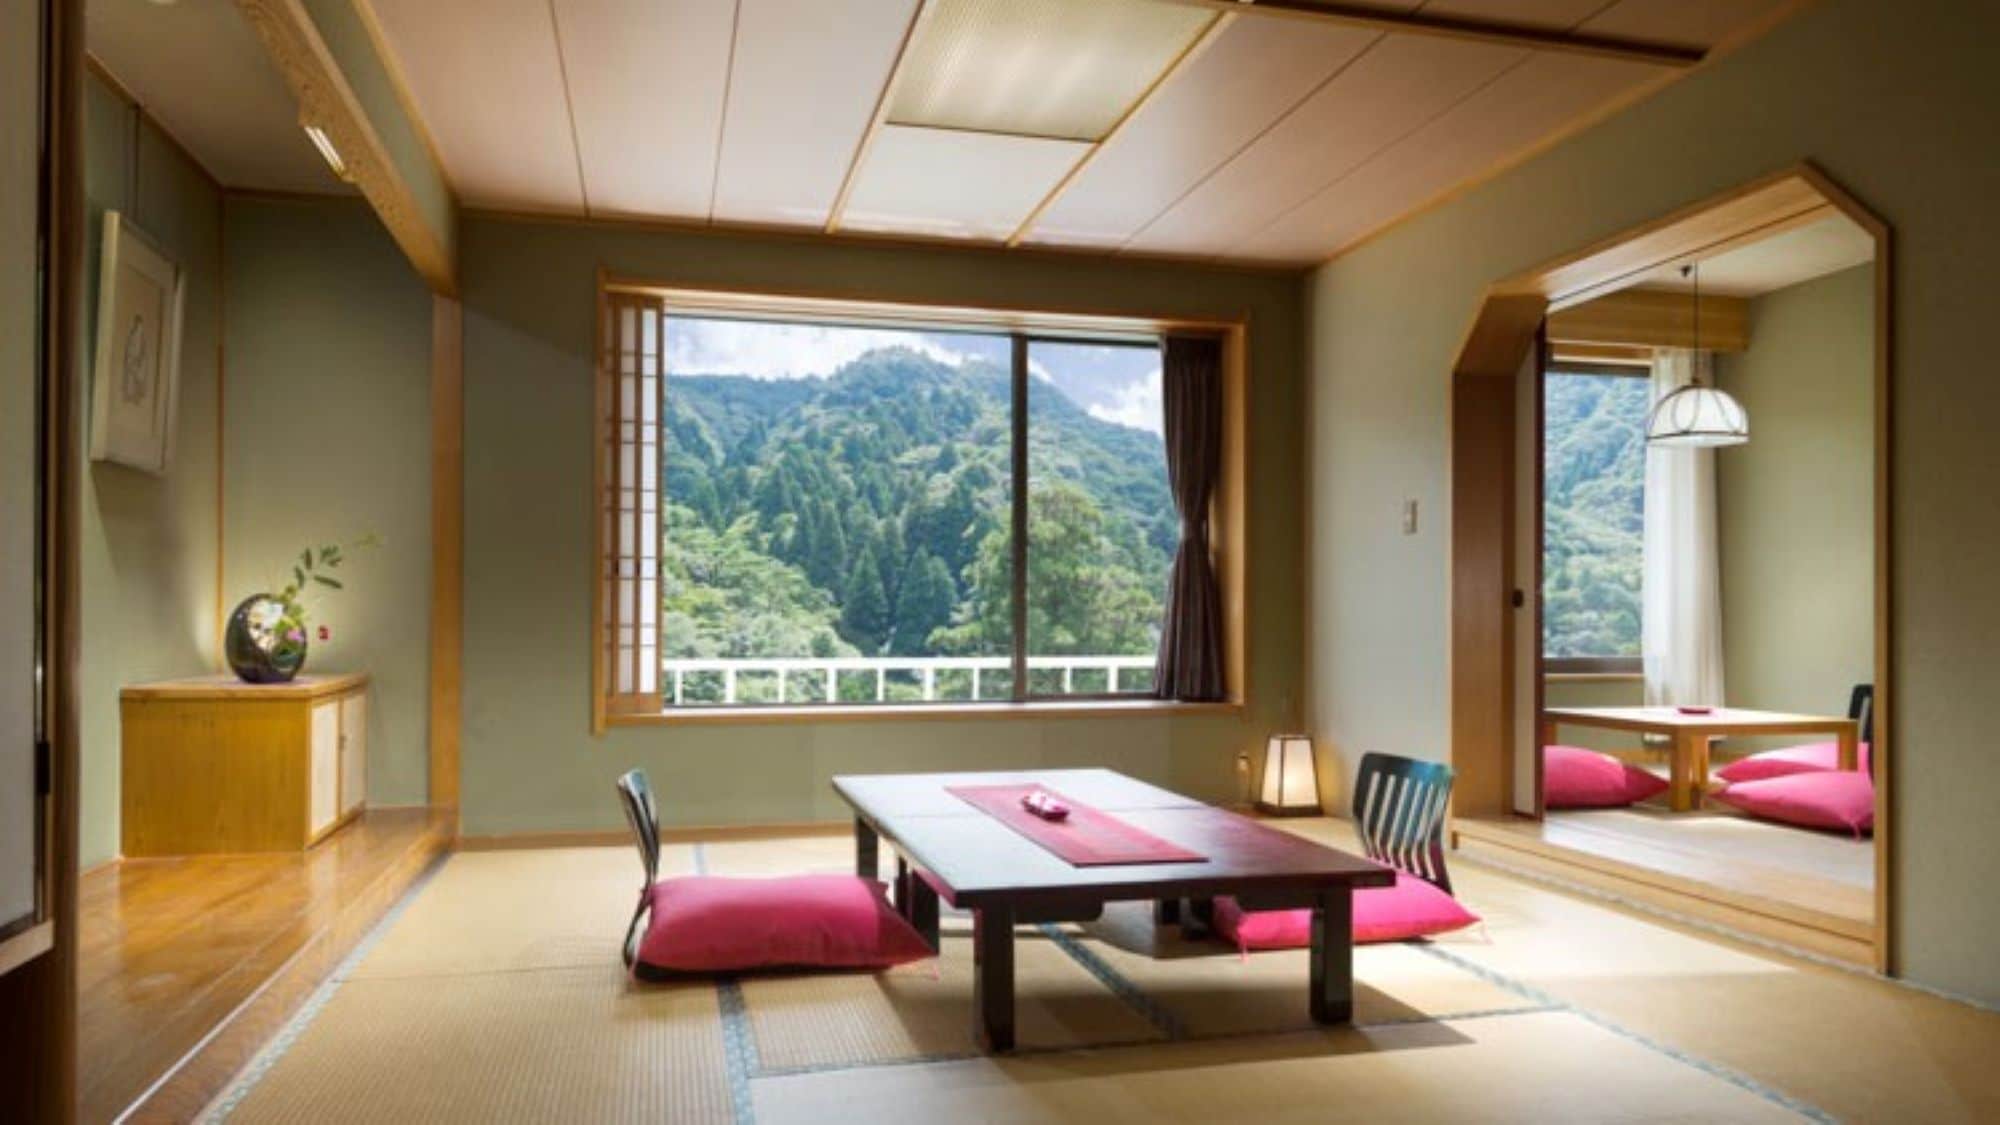 [Example of guest room (Japanese-style room)] A healing Japanese-style room surrounded by nature